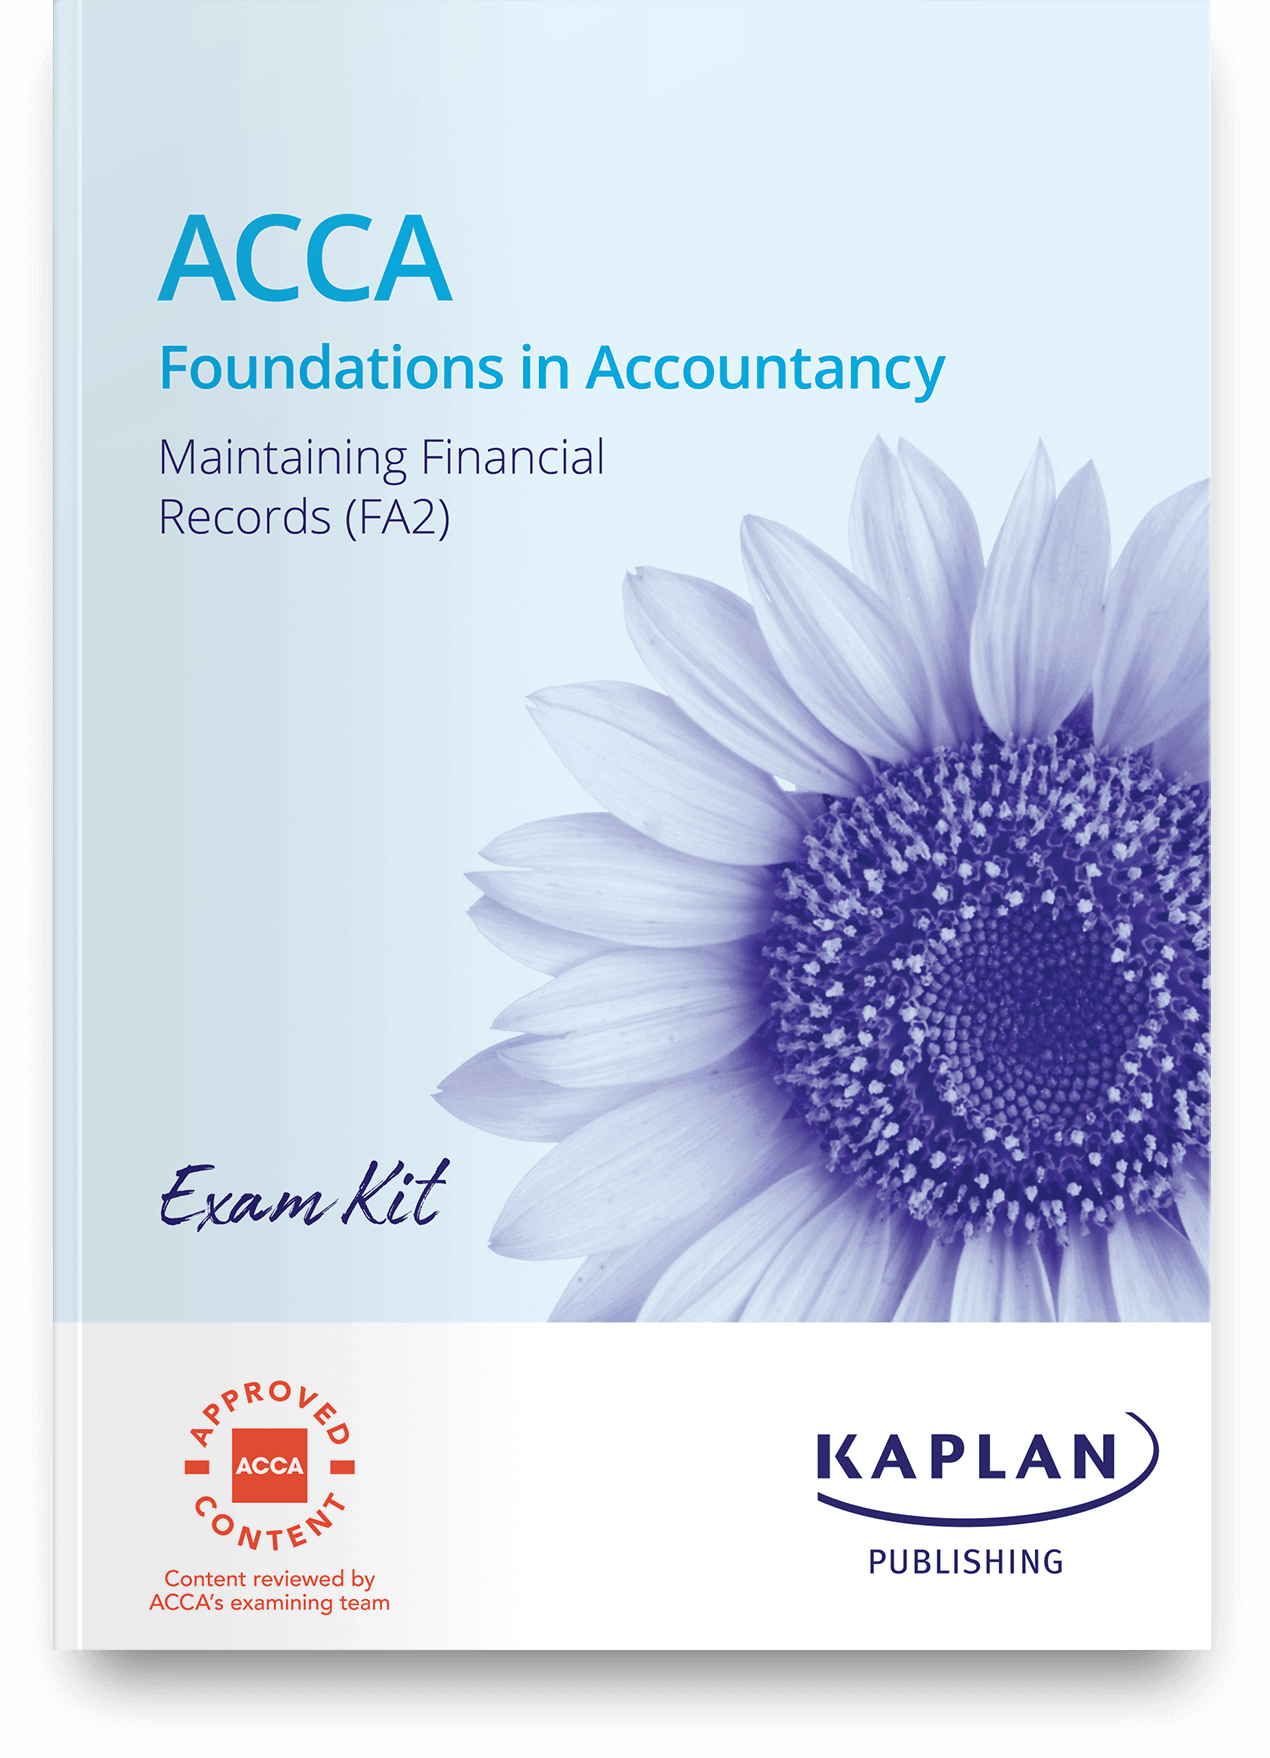 An image of ACCA Maintaining Financial Records (FA2) Exam Kit